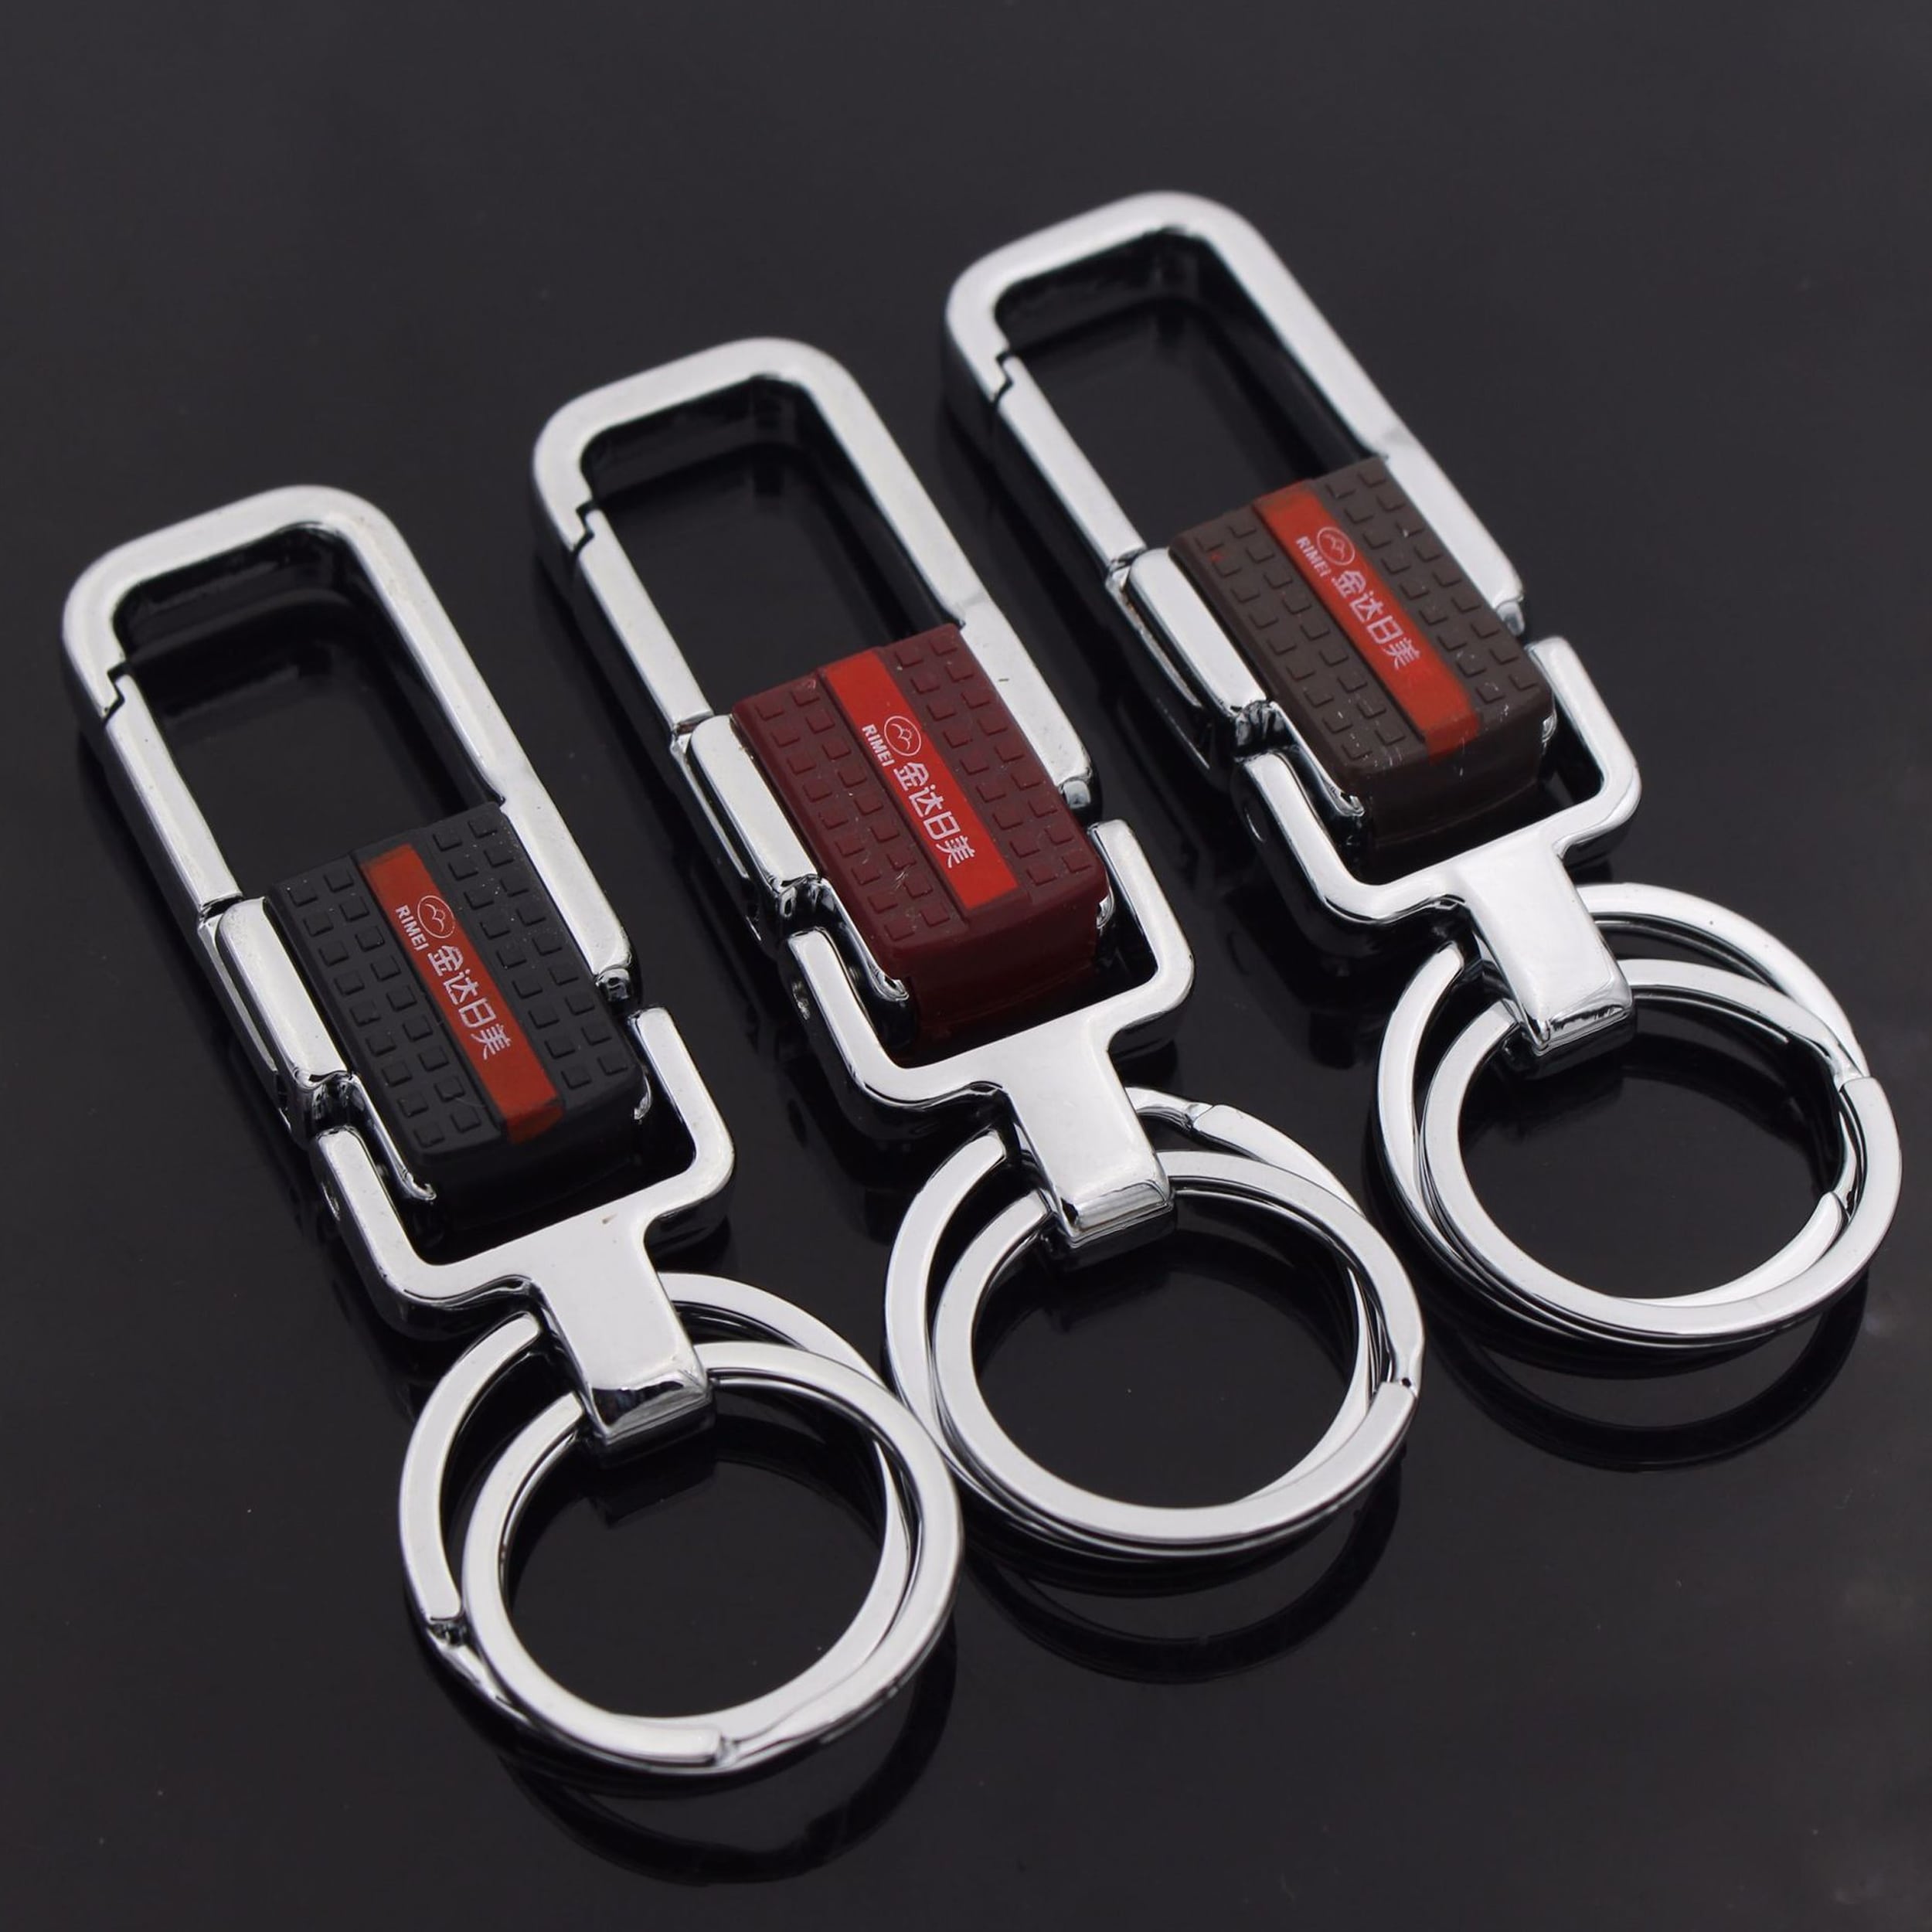 Fidget in Style with Our Wholesale Cool Metal-Fidgeting Keychain - Durable and Functional